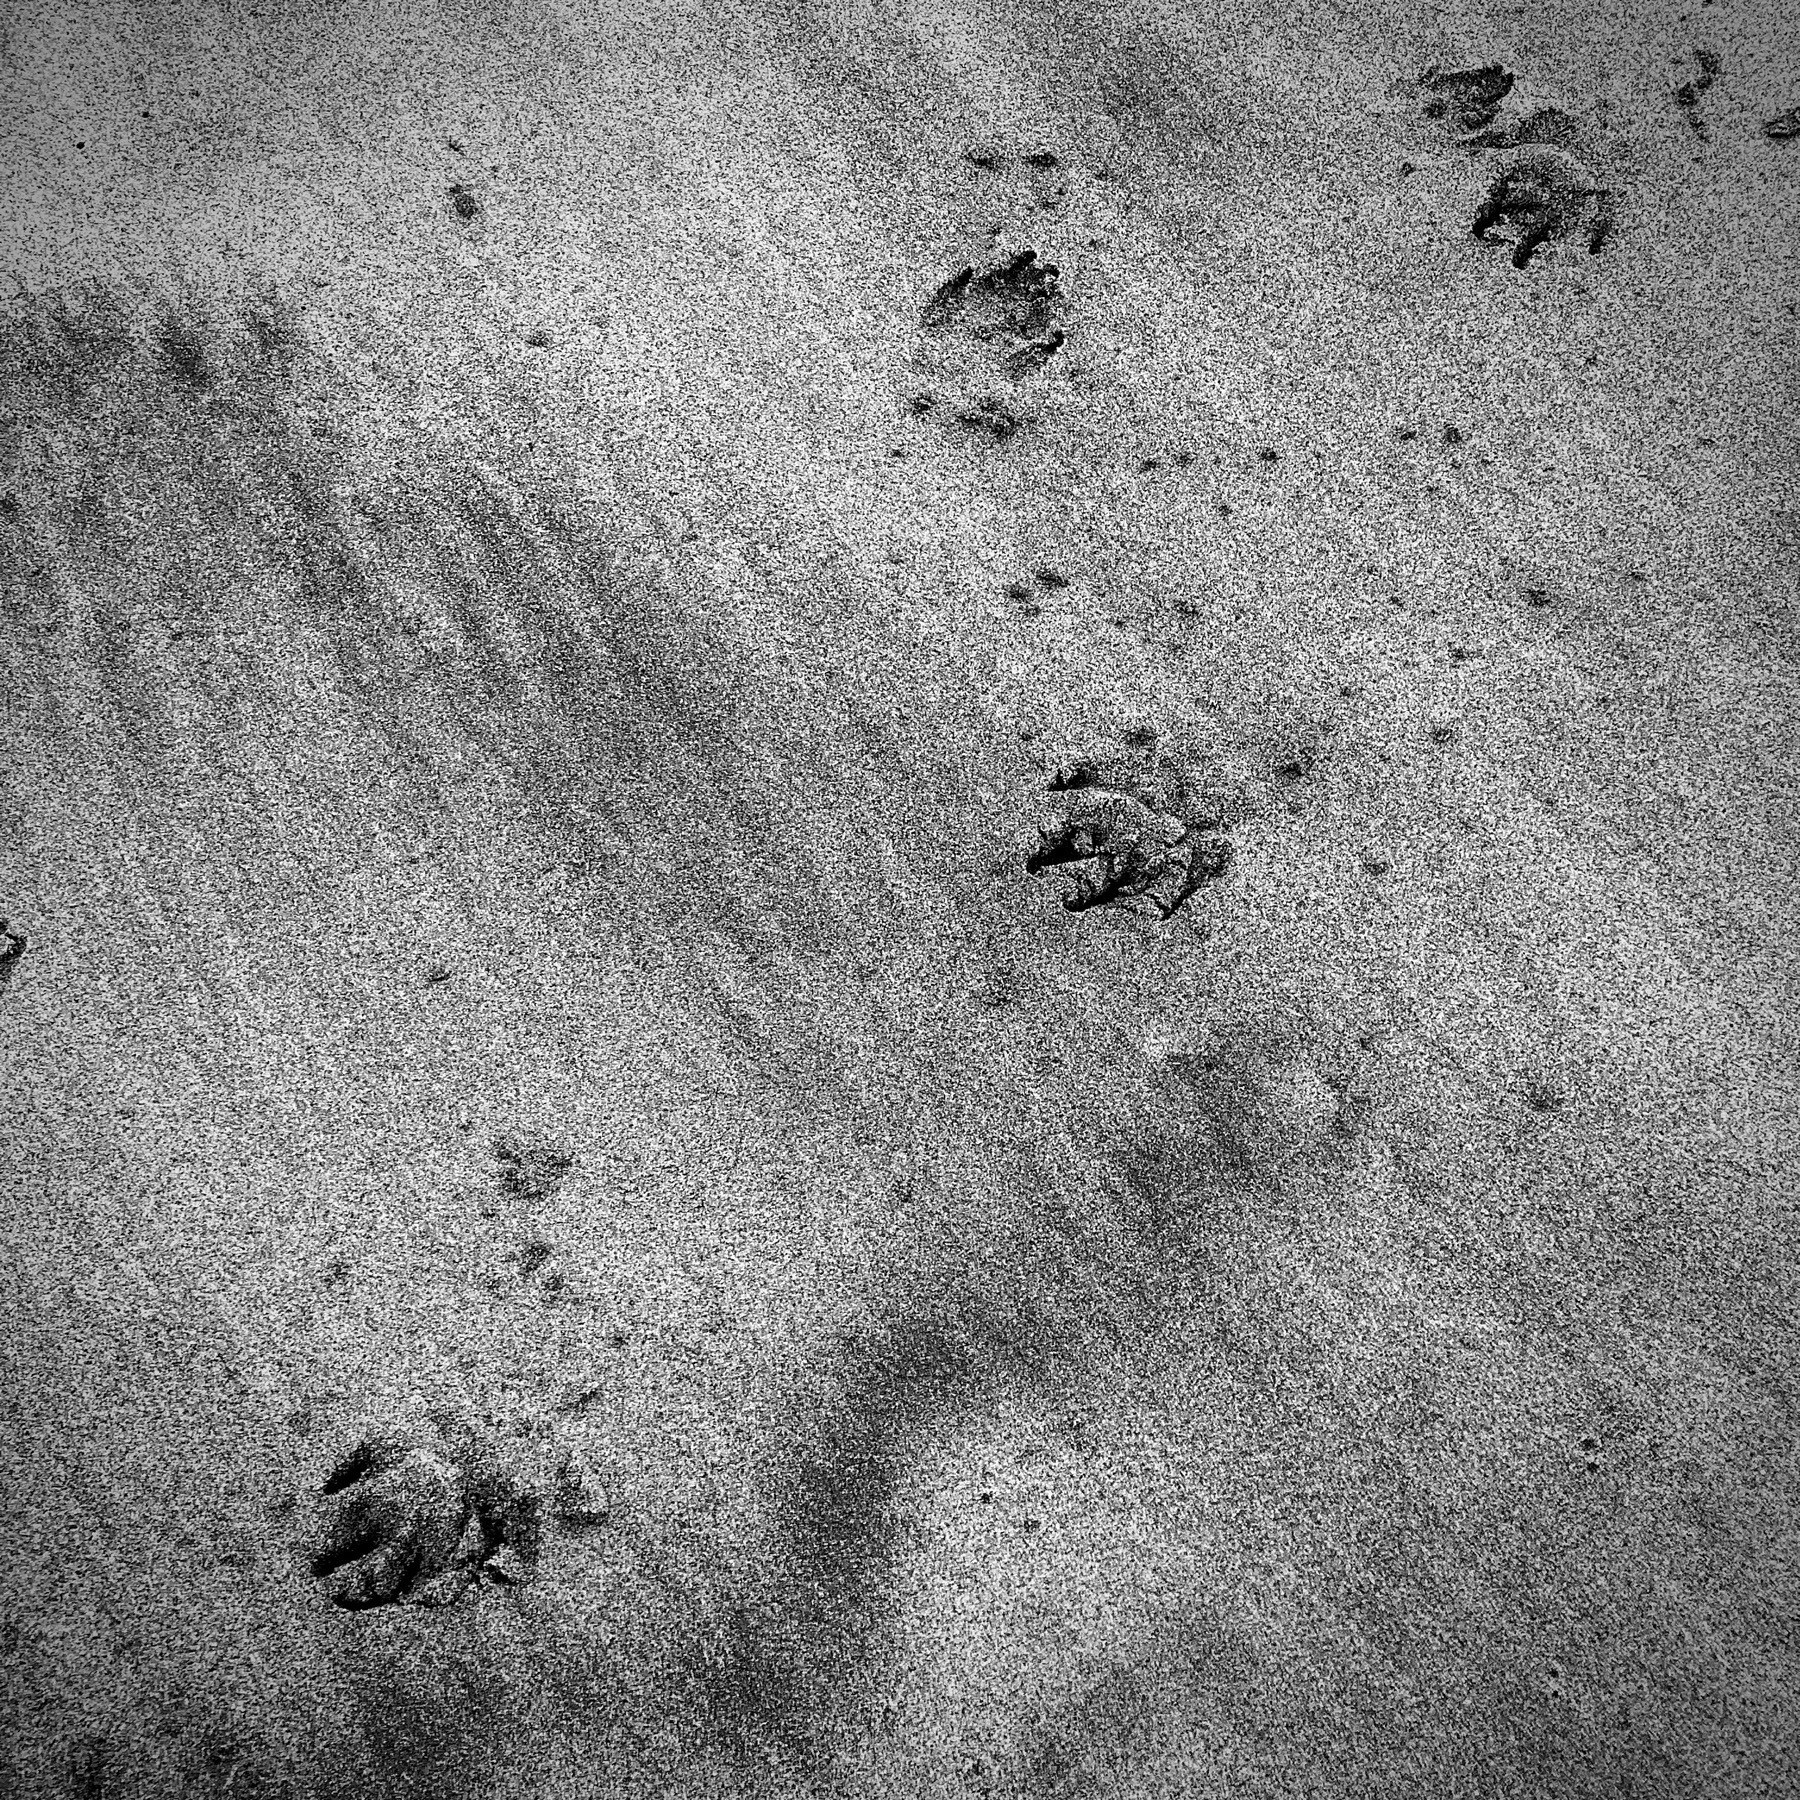 Paw prints in the sand. 